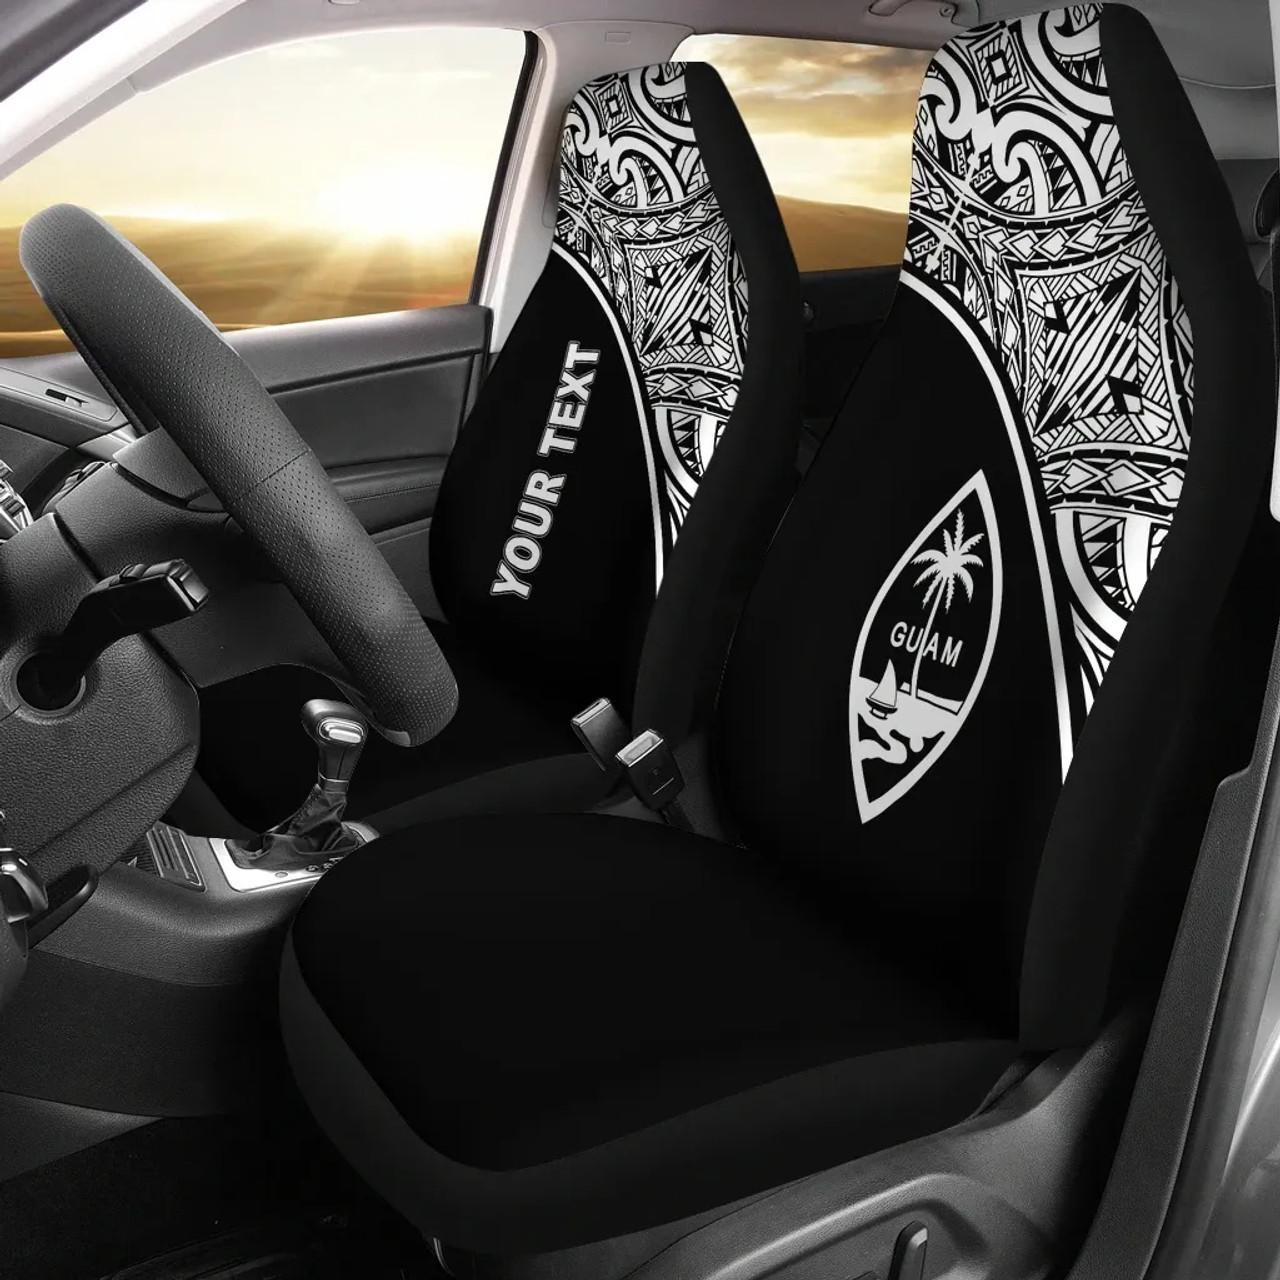 Federated States of Micronesia Car Seat Covers - FSM Seal Polynesian Black Curve